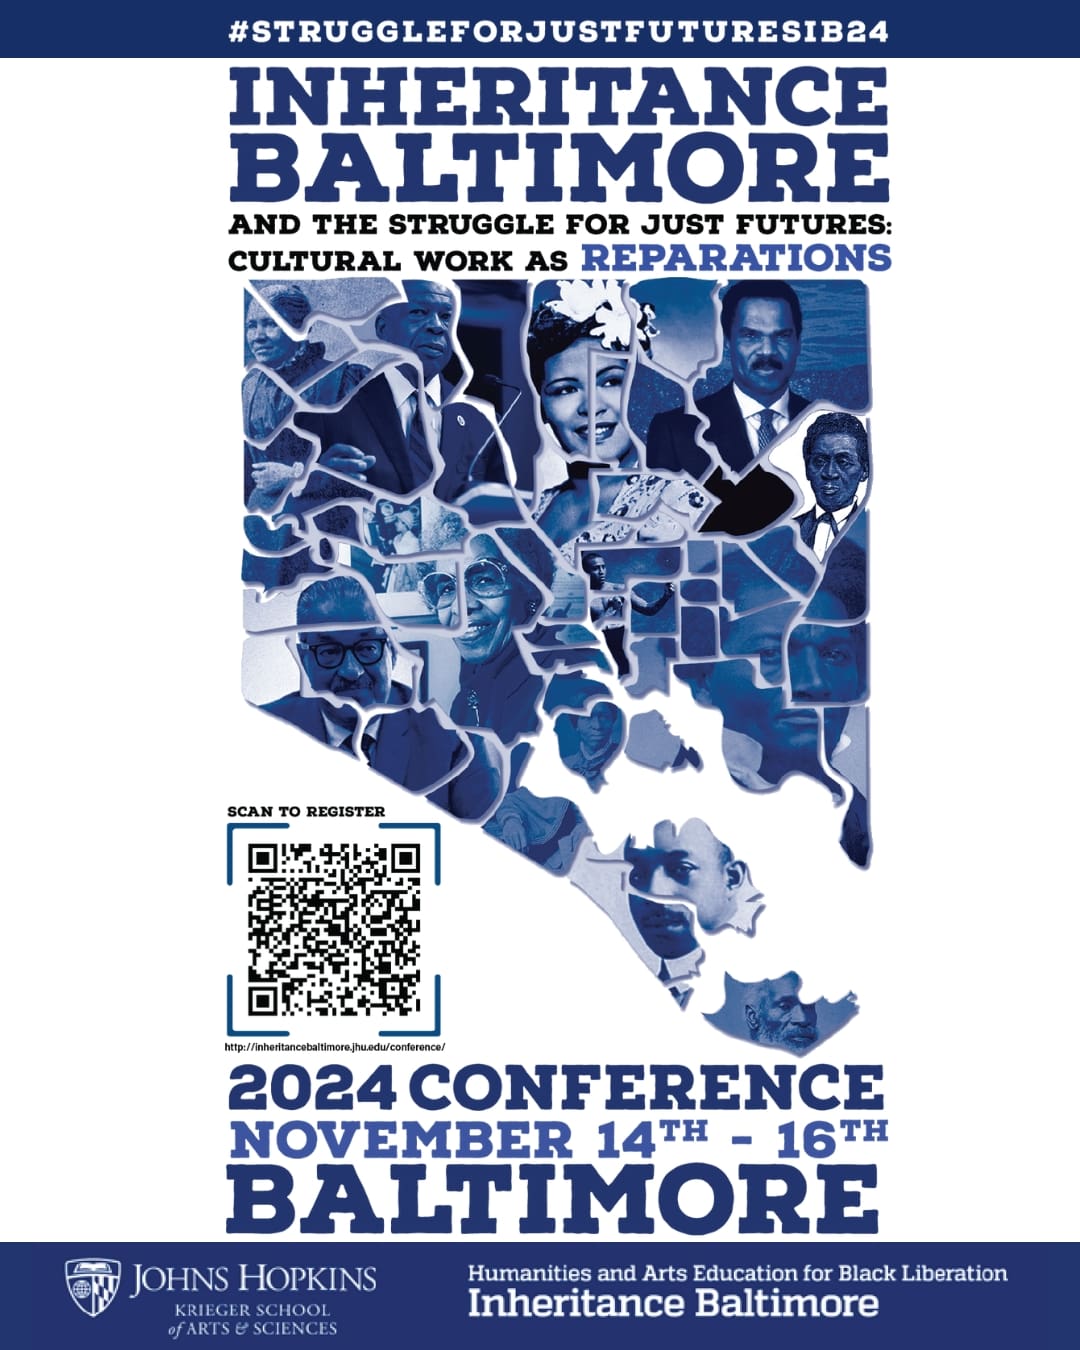 a blue map of Baltimore city with pictures of famous Black Baltimoreans superimposed over the neighborhoods